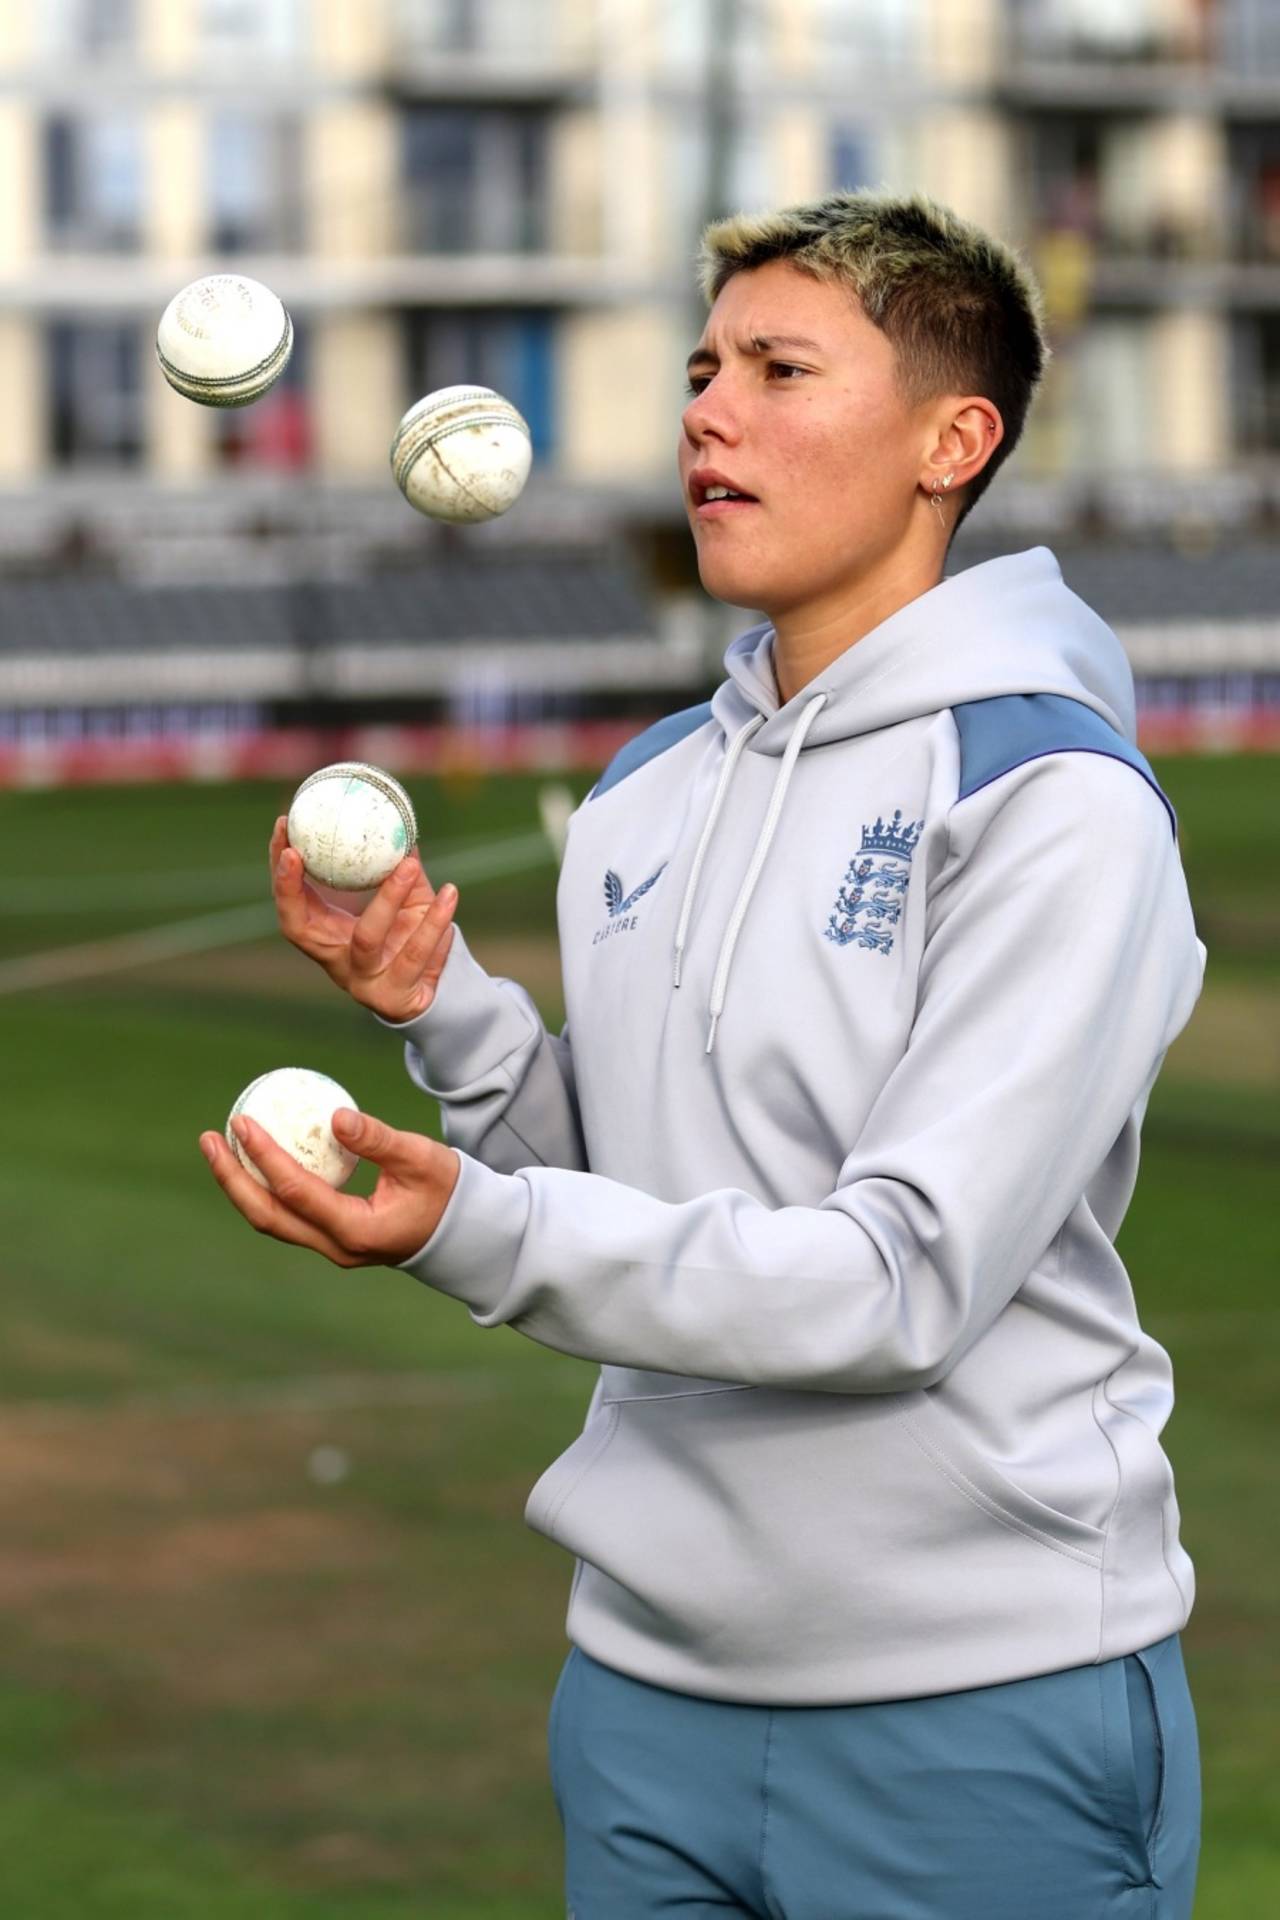 Issy Wong shows off her juggling skills, England vs India, 3rd T20I, Bristol, September 15, 2022